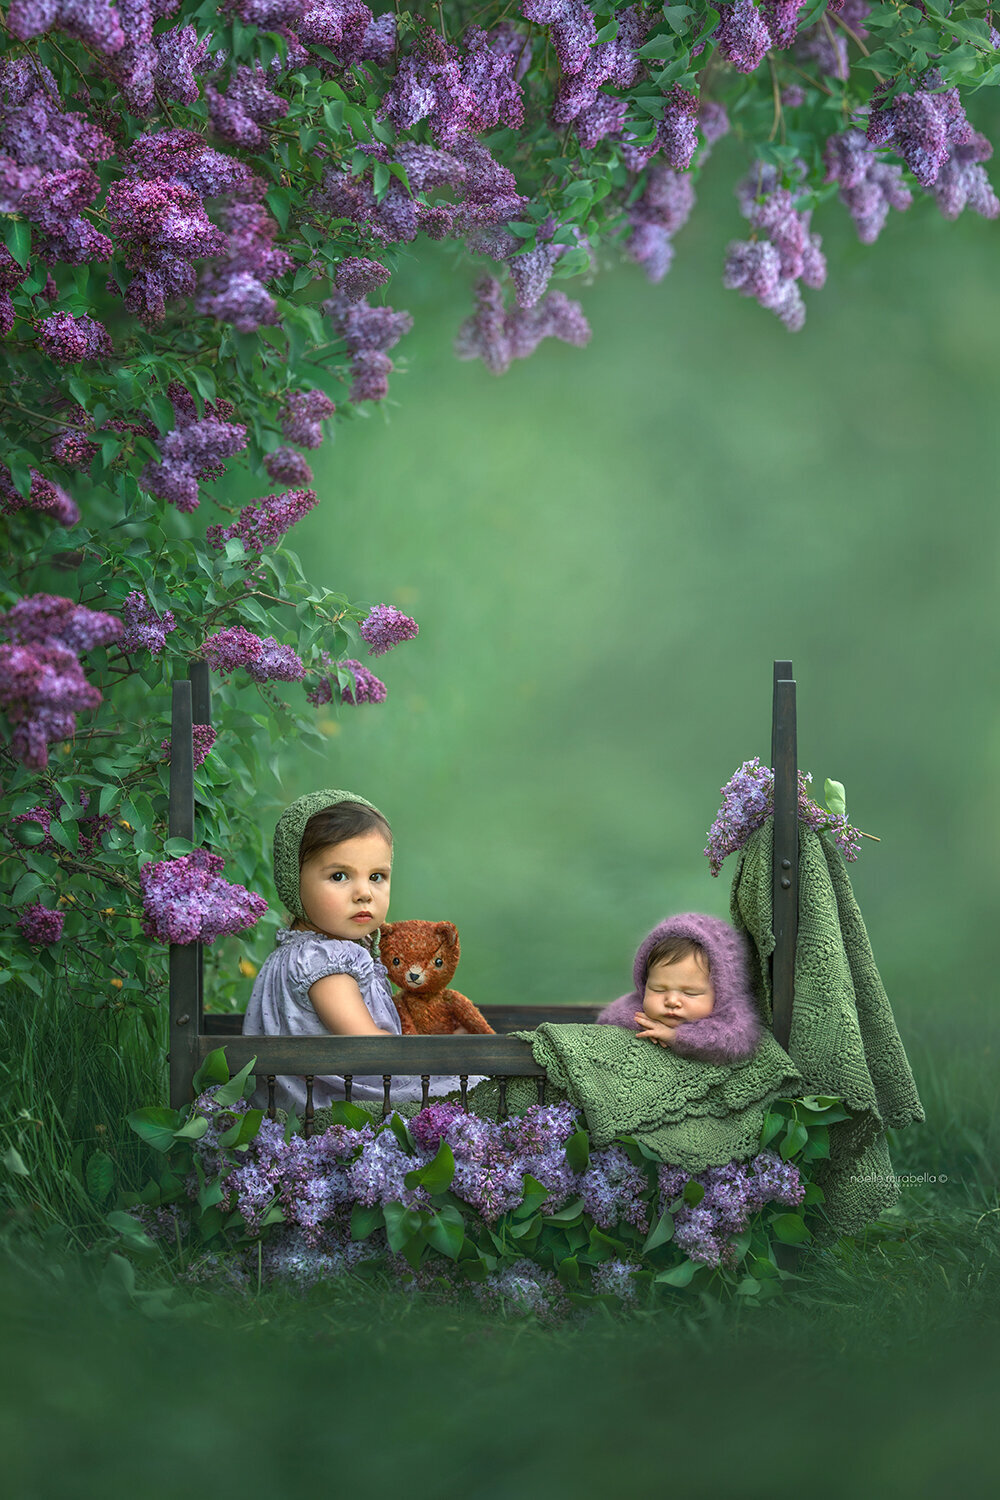 Baby girls in a crib outside under lilac branches full of blooms.